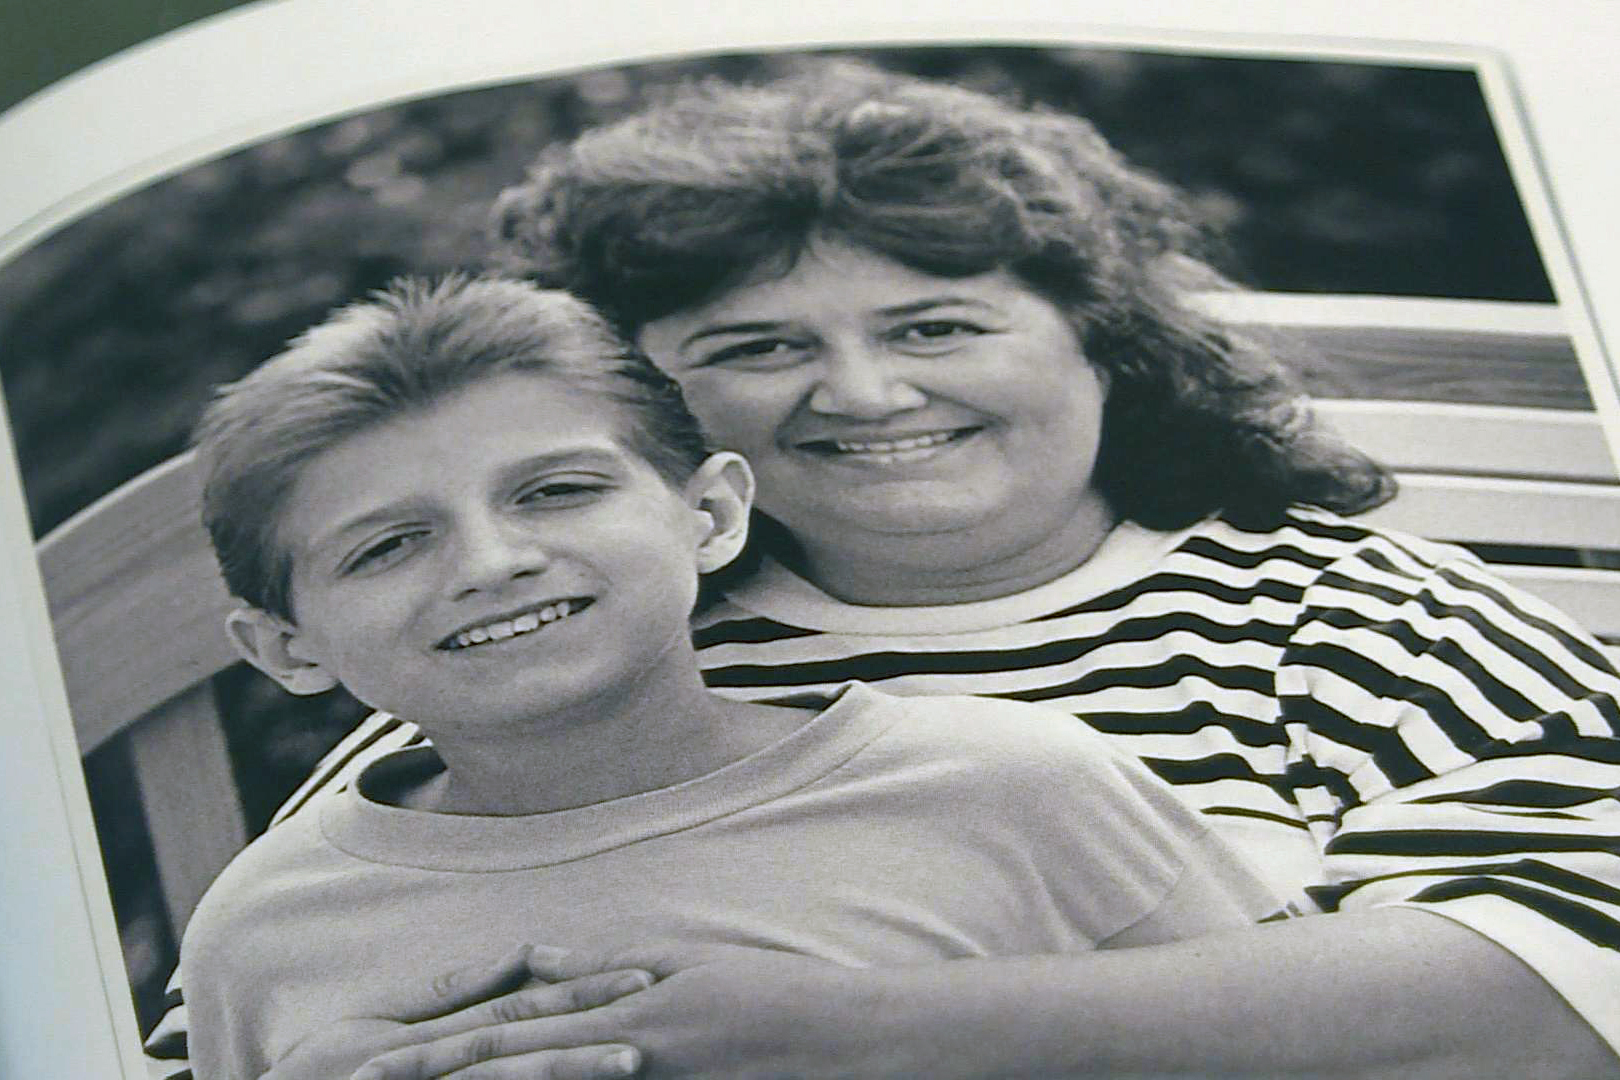 Ryan White with mom